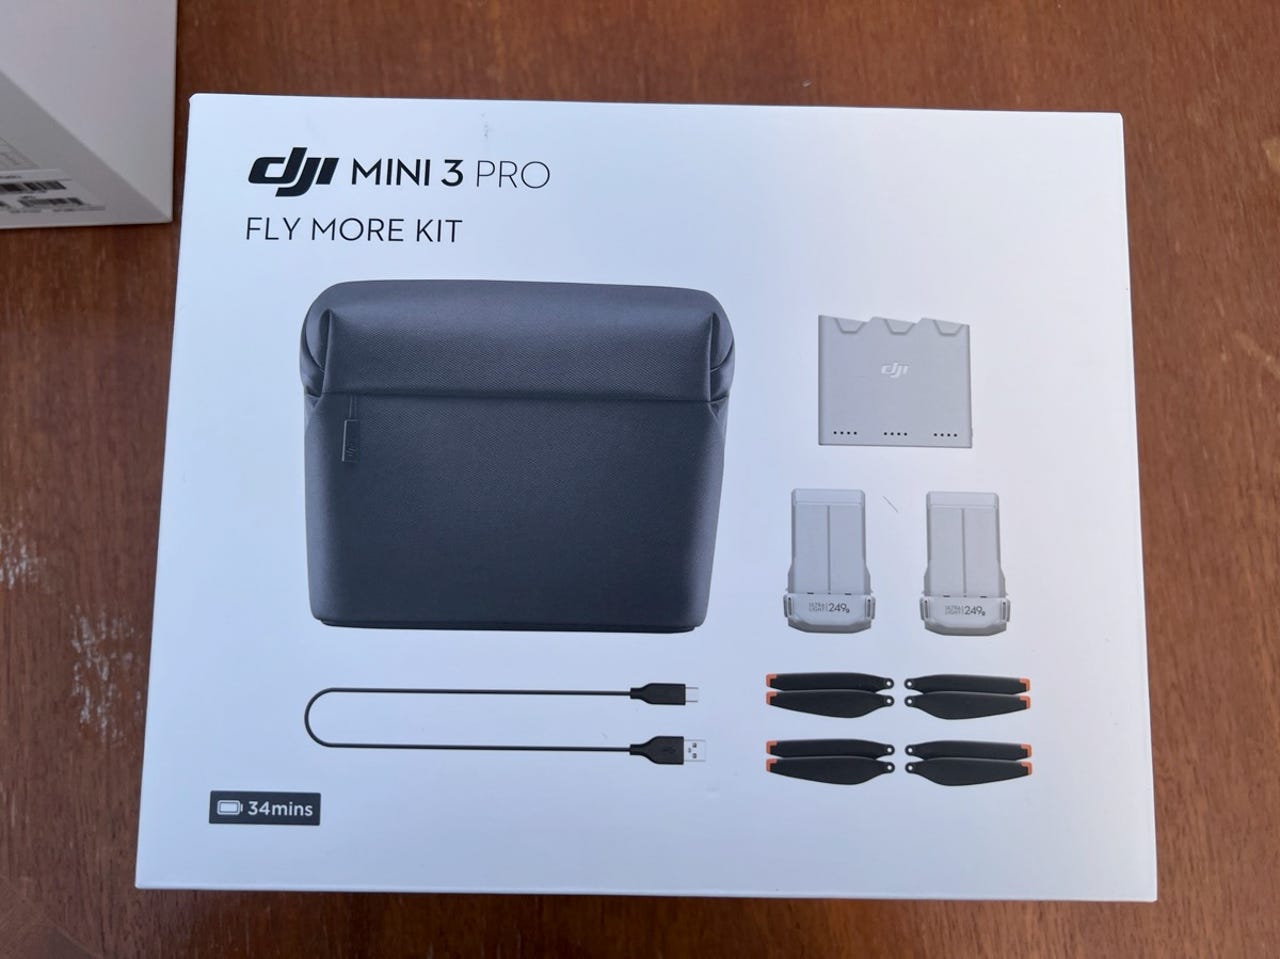 DJI Mini 3 Pro first ZDNET | camera flying tiny, impressions: A around battery quiet, wrapped a